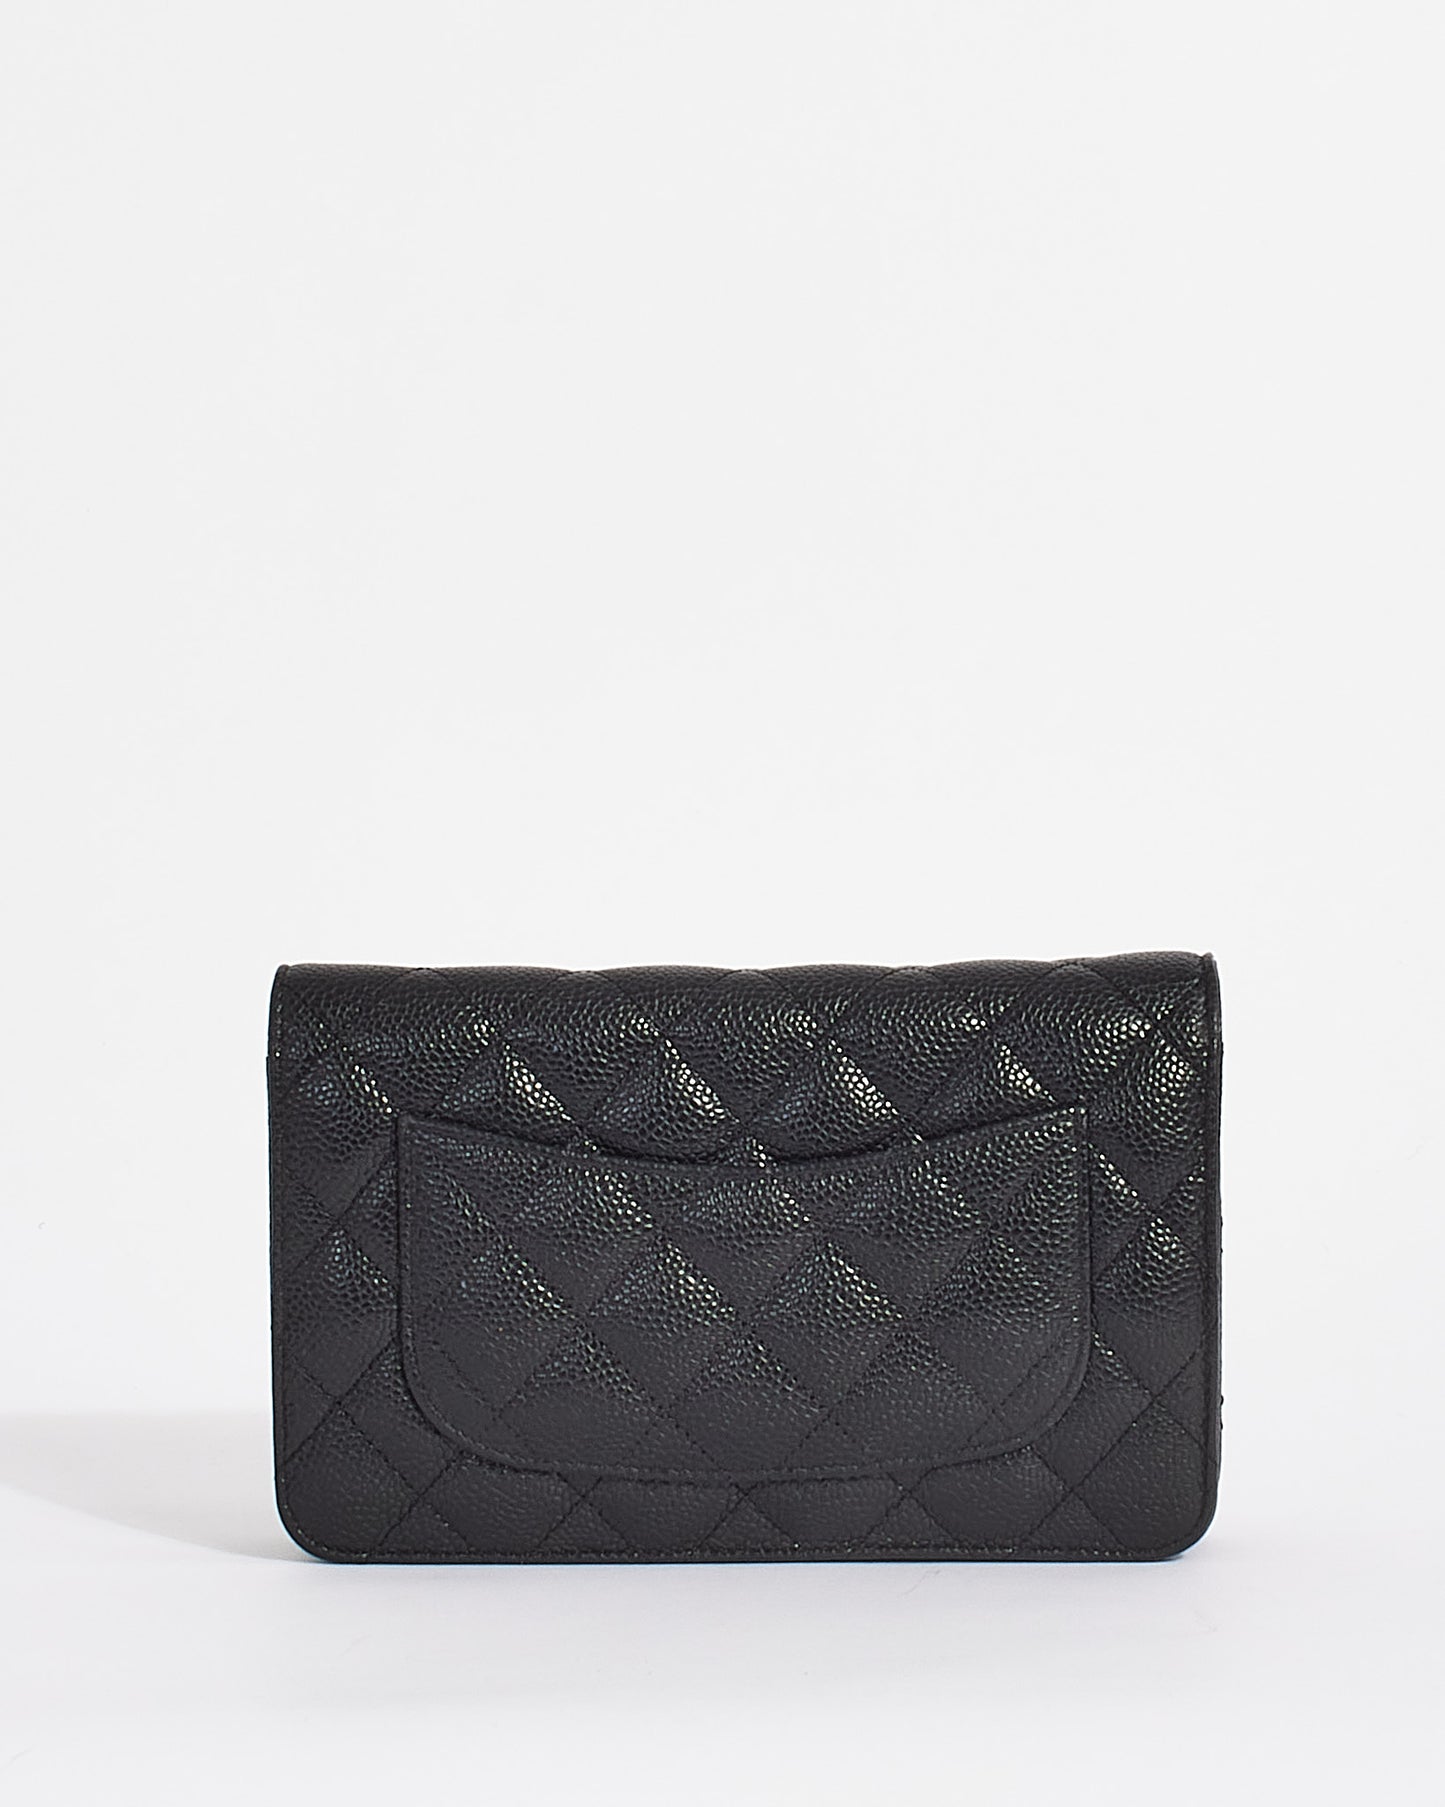 Chanel Black Caviar Leather Quilted Wallet on Chain Bag SHW